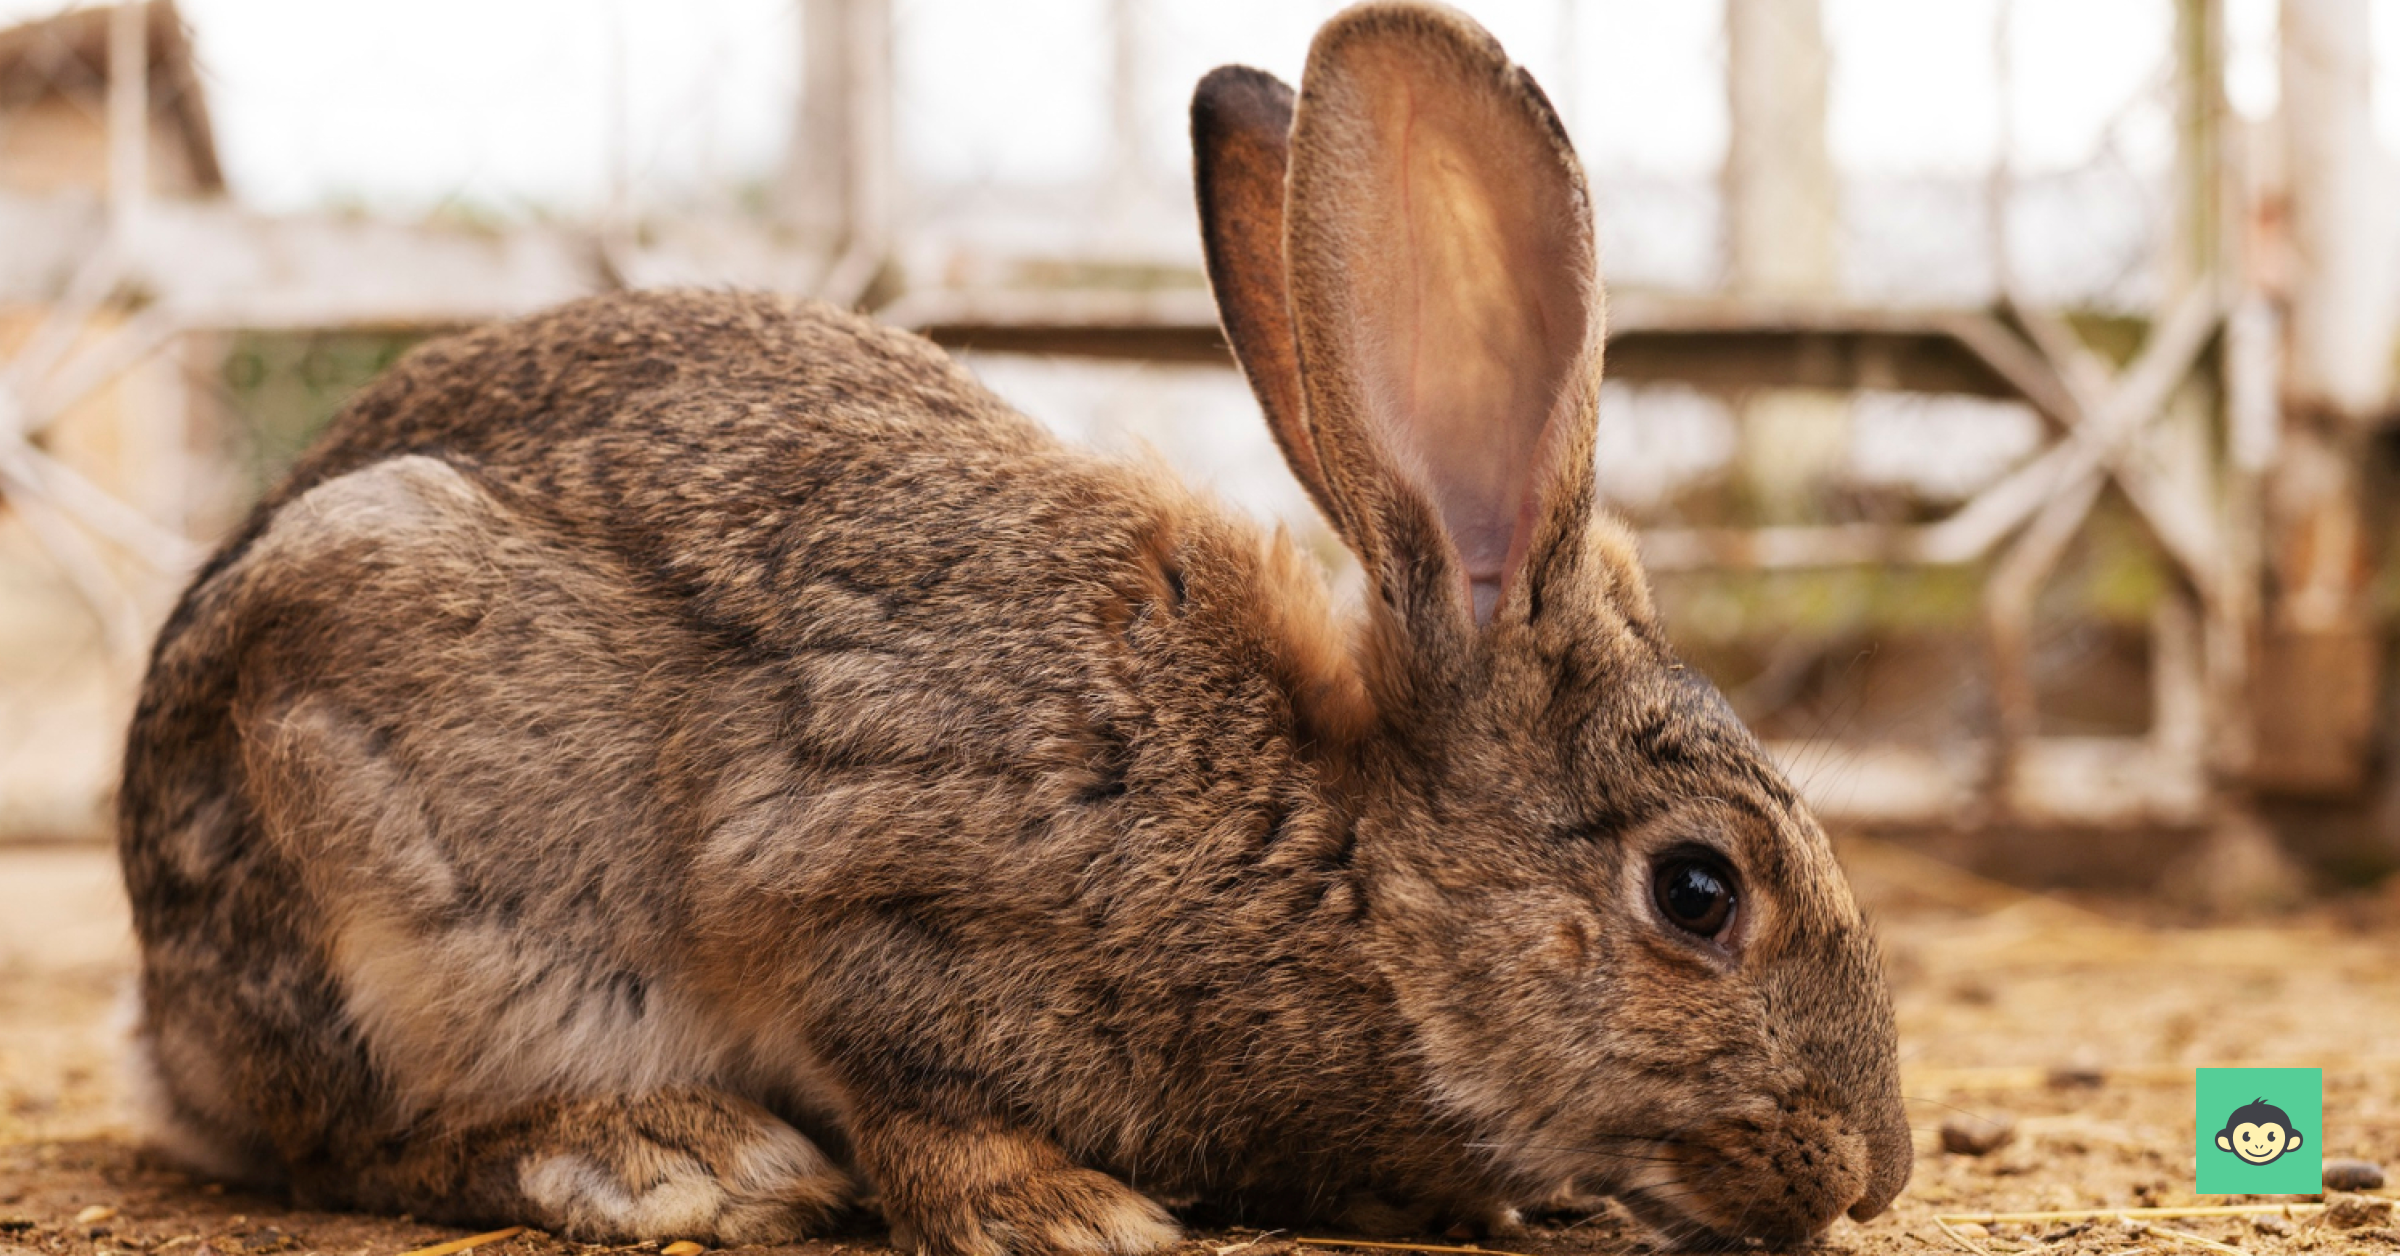 You don't need rabbit's foot for luck to implement employee experience management